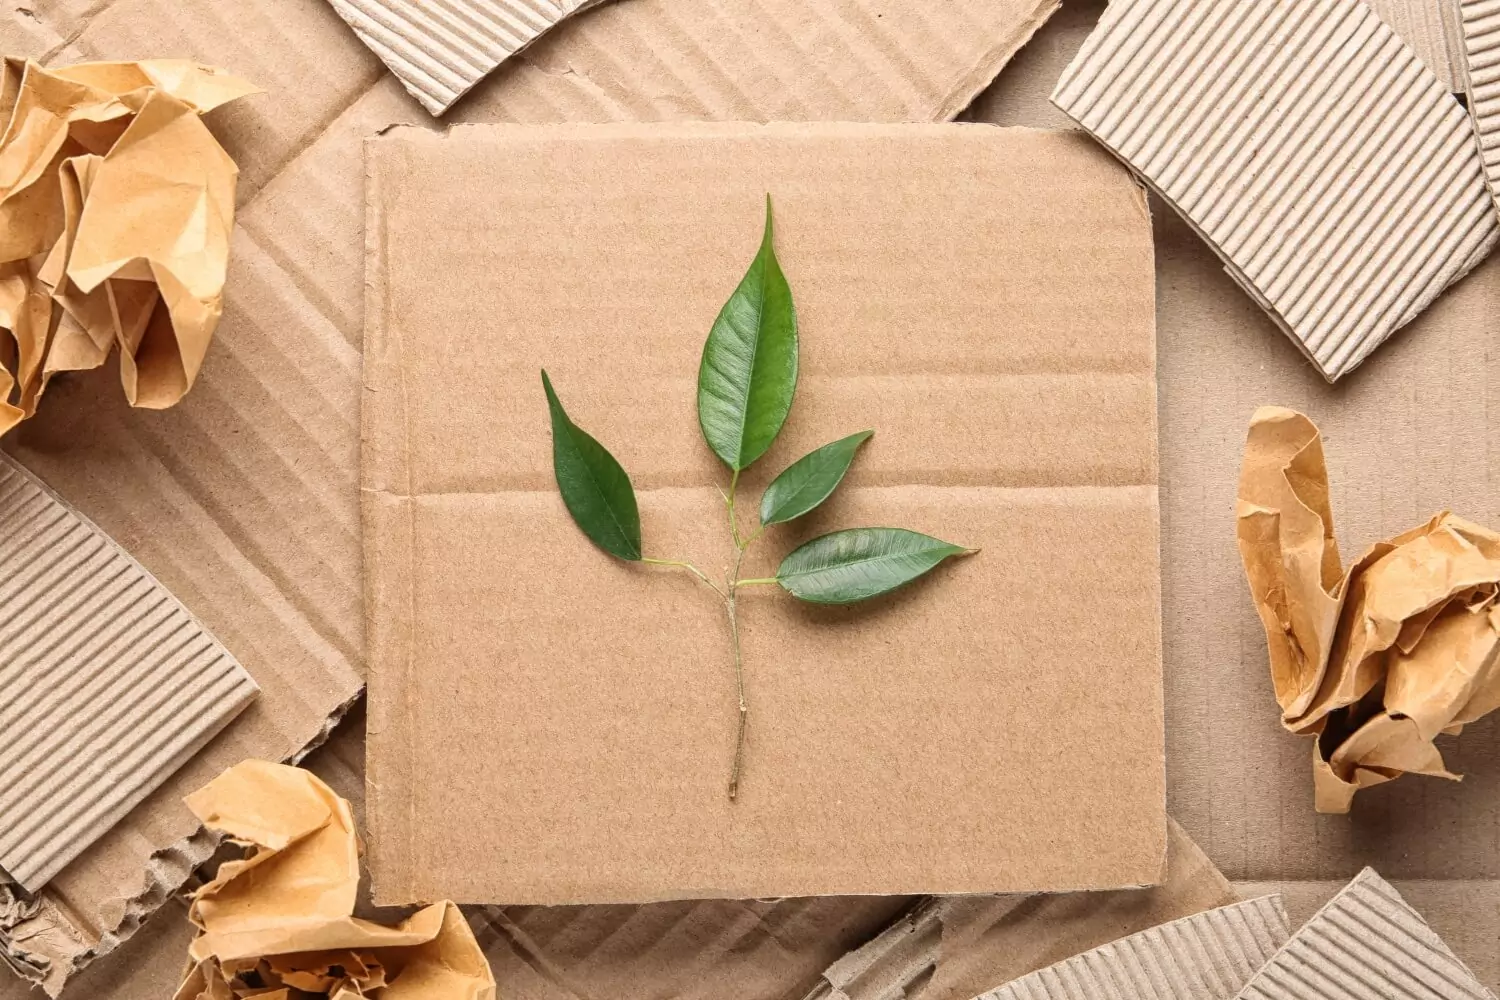 Sustainable Packaging – Trends, Benefits, and Impact